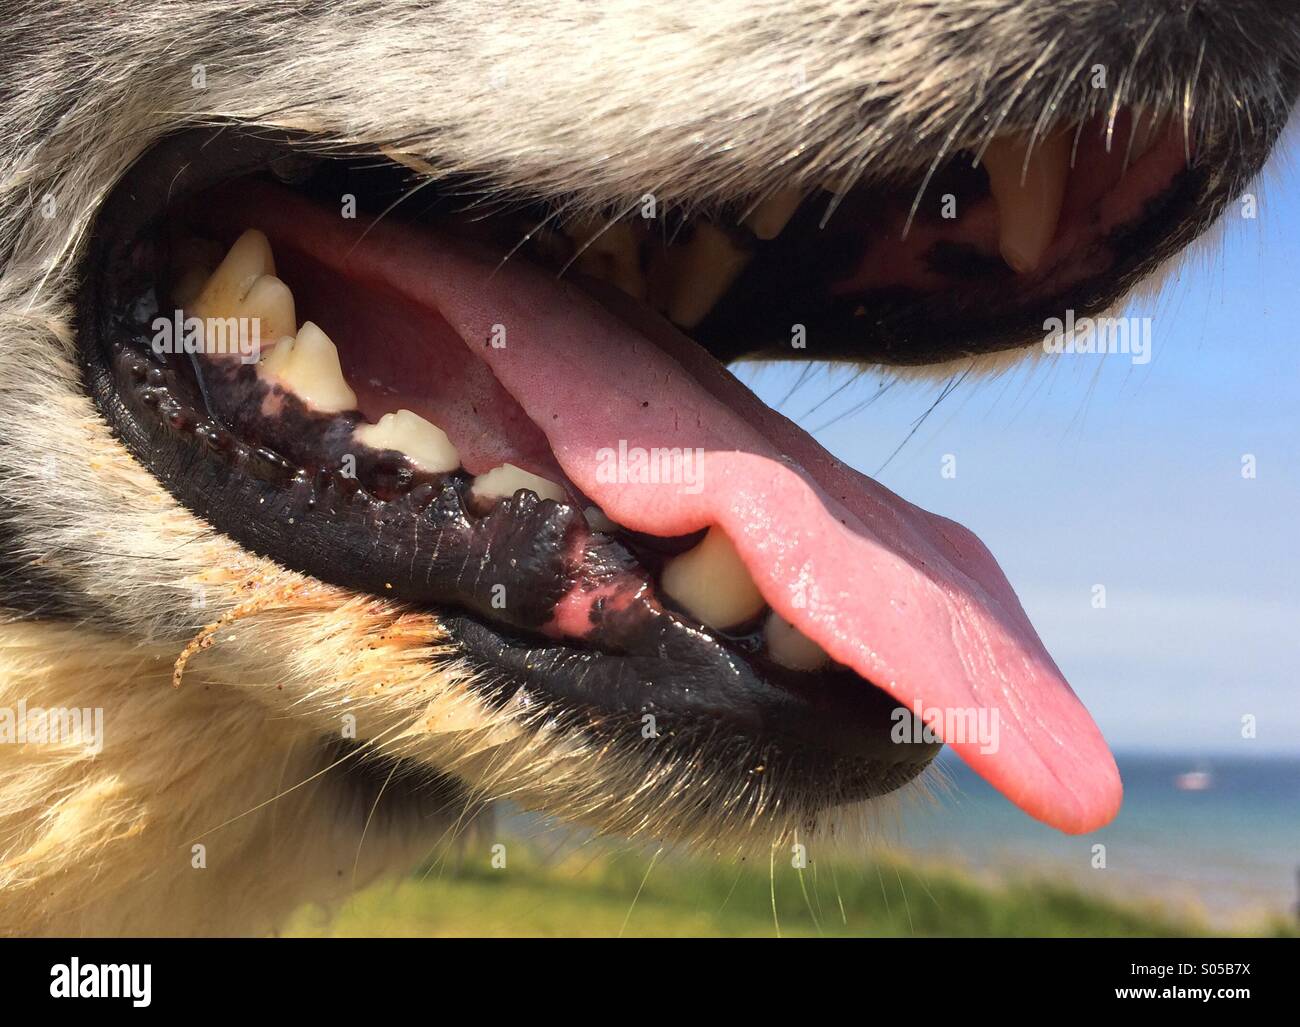 how do you look inside a dogs mouth